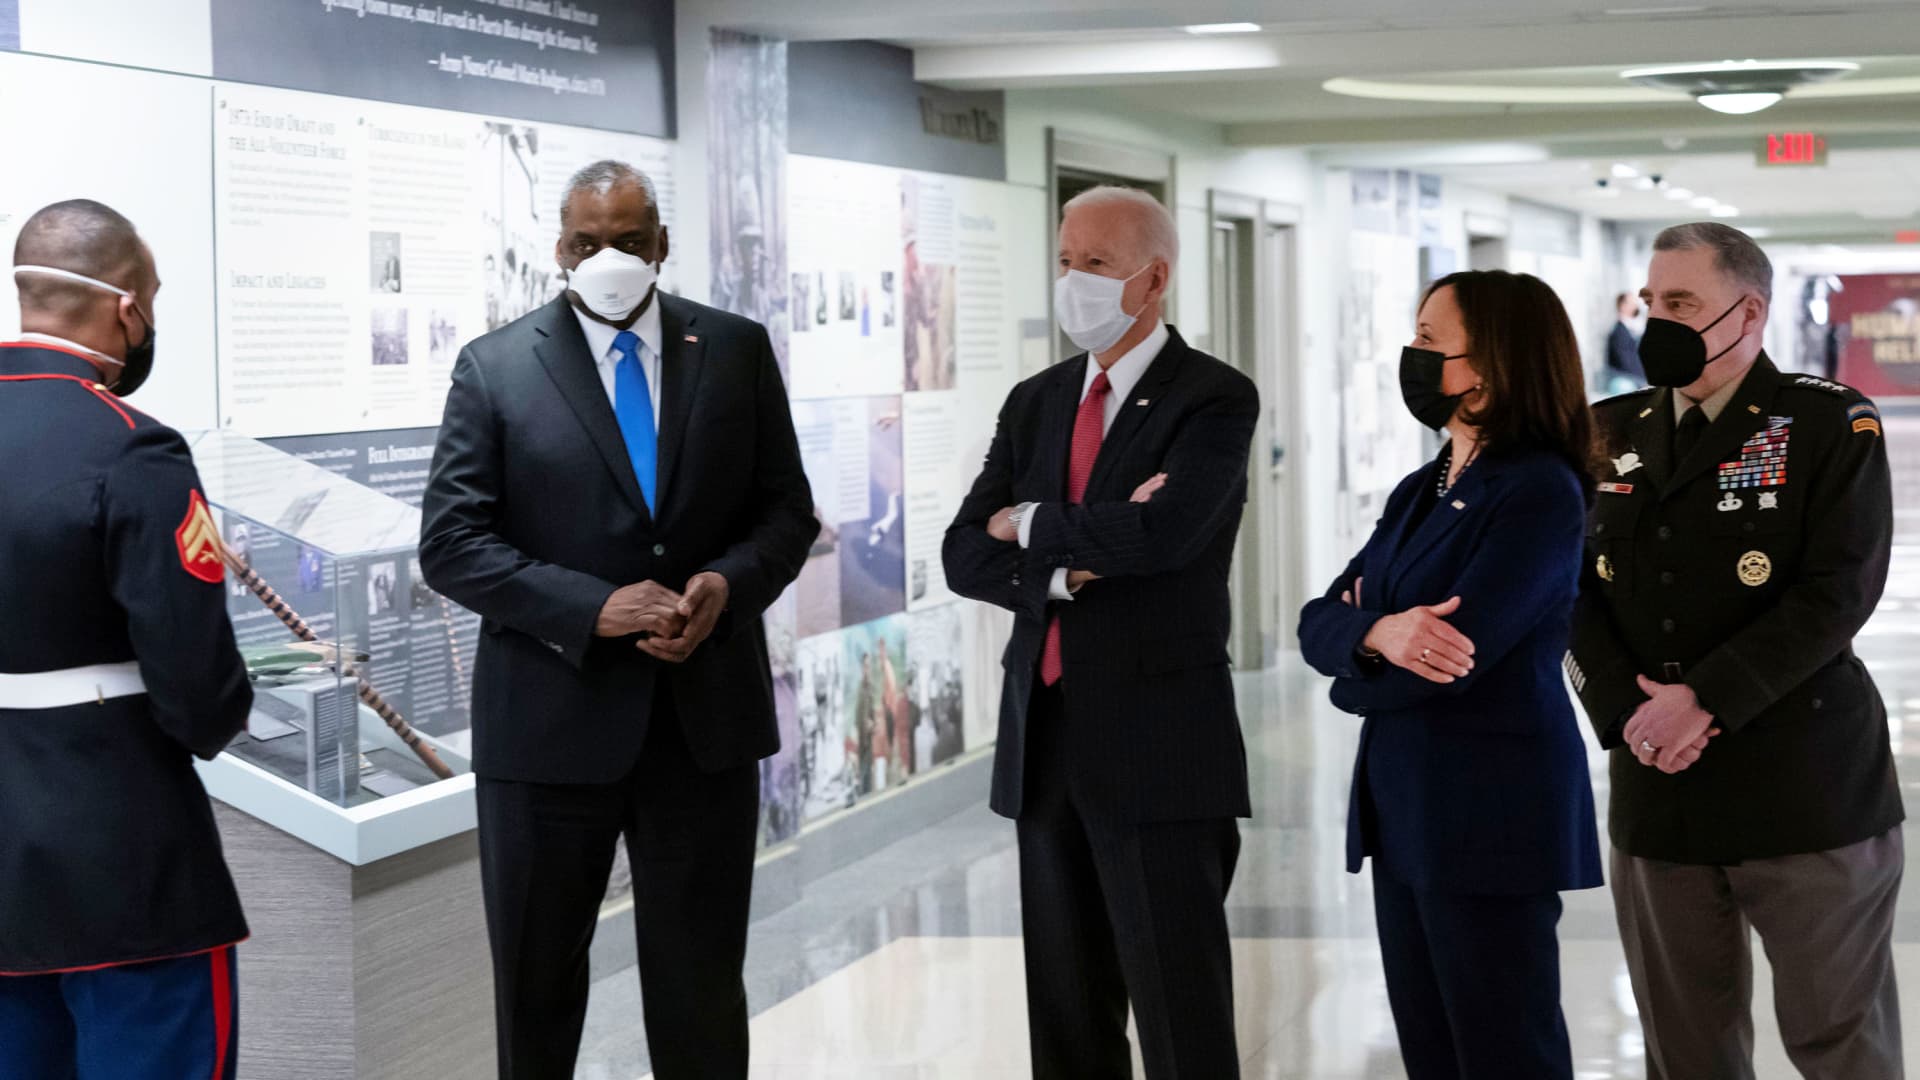 U.S. President Joe Biden, accompanied by Vice President Kamala Harris, Secretary of Defense Lloyd Austin, and Joint Chiefs of Staff Chairman Gen. Mark Milley, tours the African Americans in Defense of our Nations Corridor at the Pentagon in Arlington, Virginia, February 10, 2021.